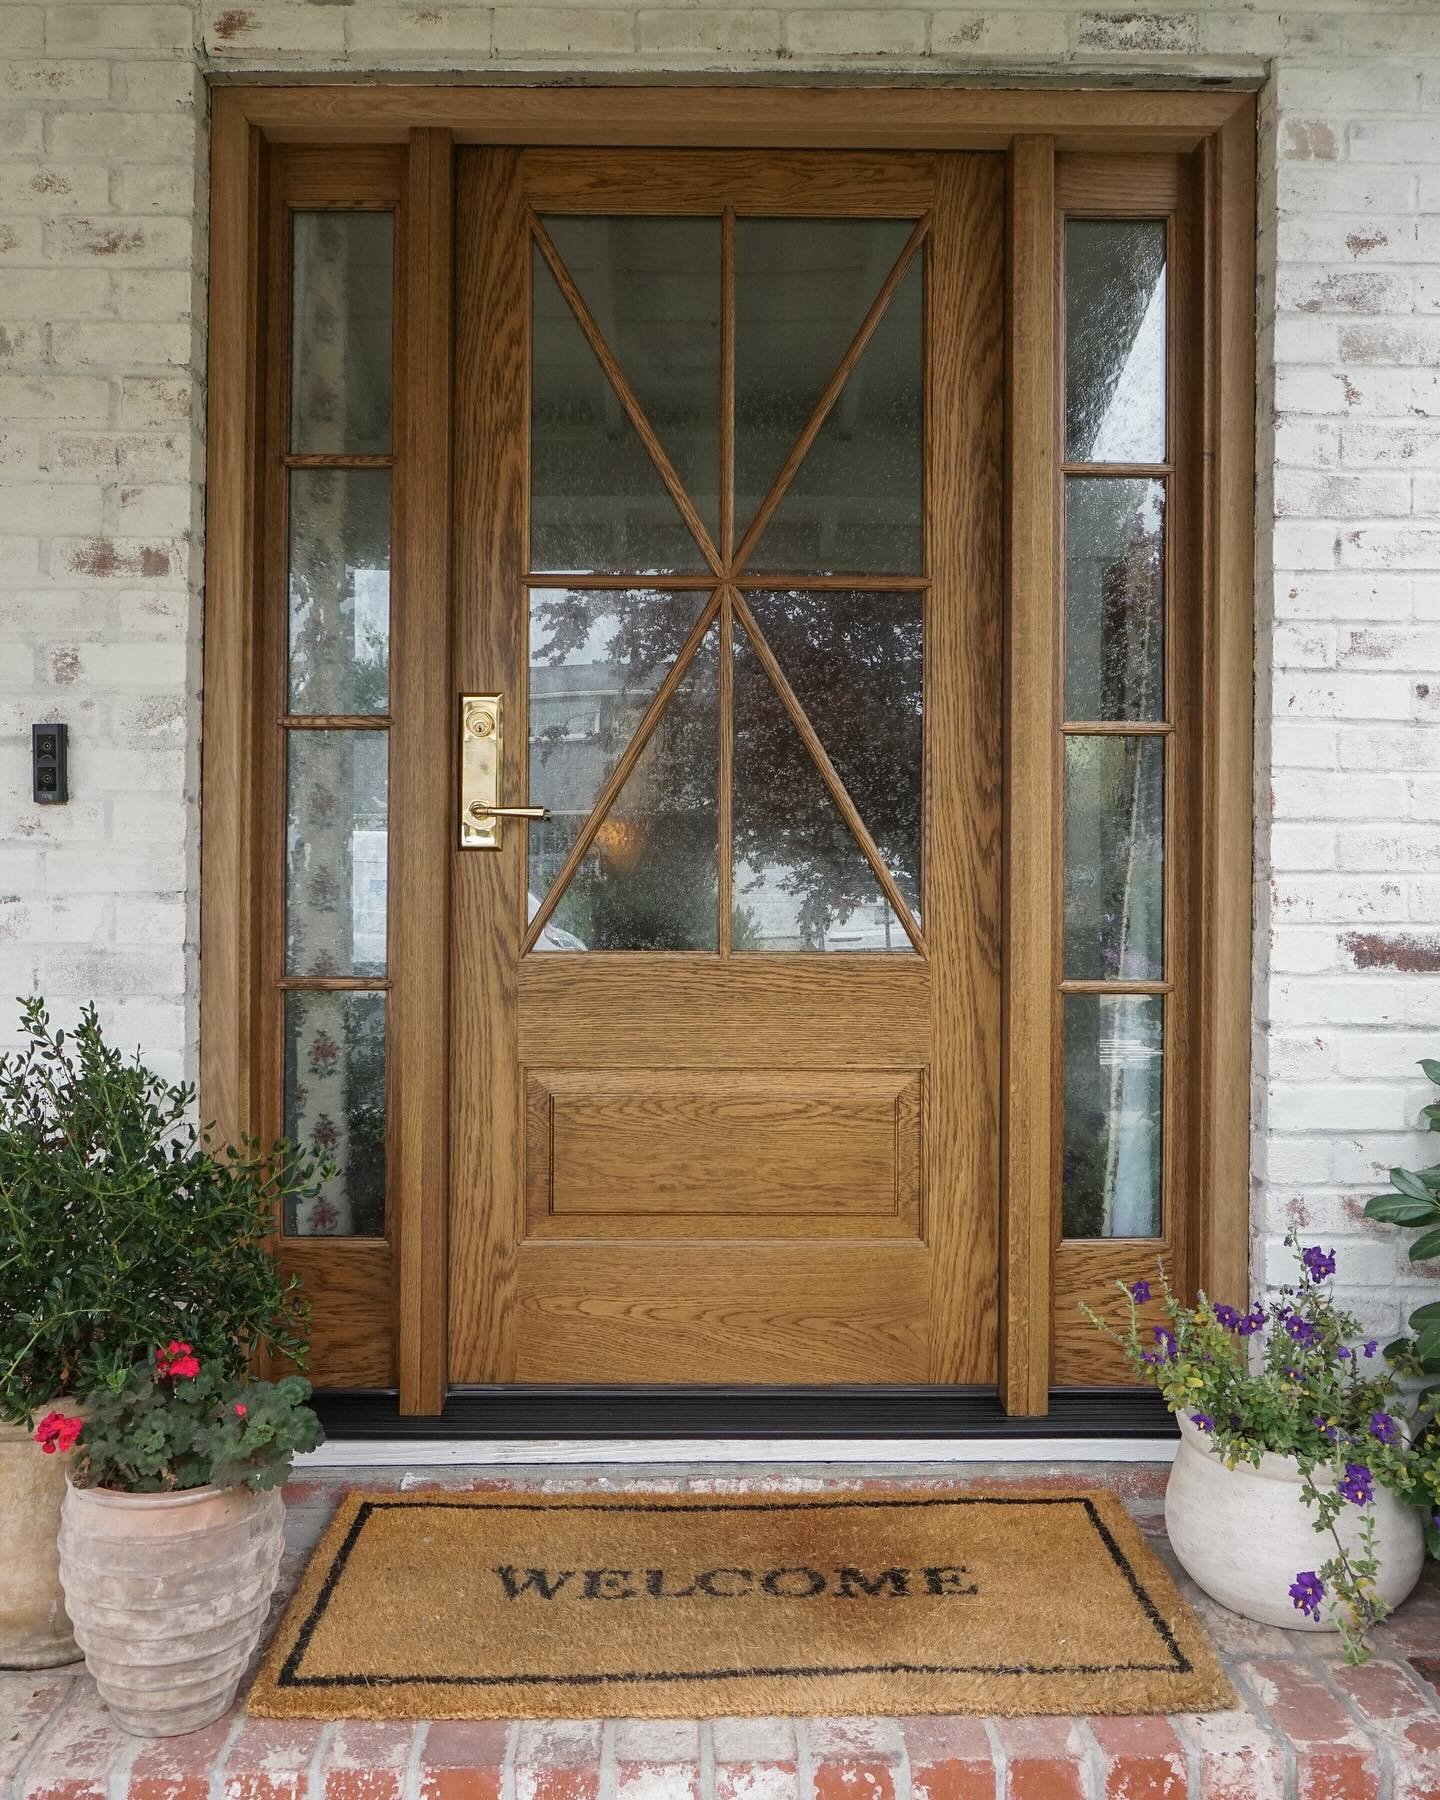 We got a new front door, and it turned out even better than I imagined! 😍 It&rsquo;s truly a dream come true, and the wait was so worth it.
My stories fam knows I&rsquo;ve been talking about changing our front door for over a year. It&rsquo;s been a